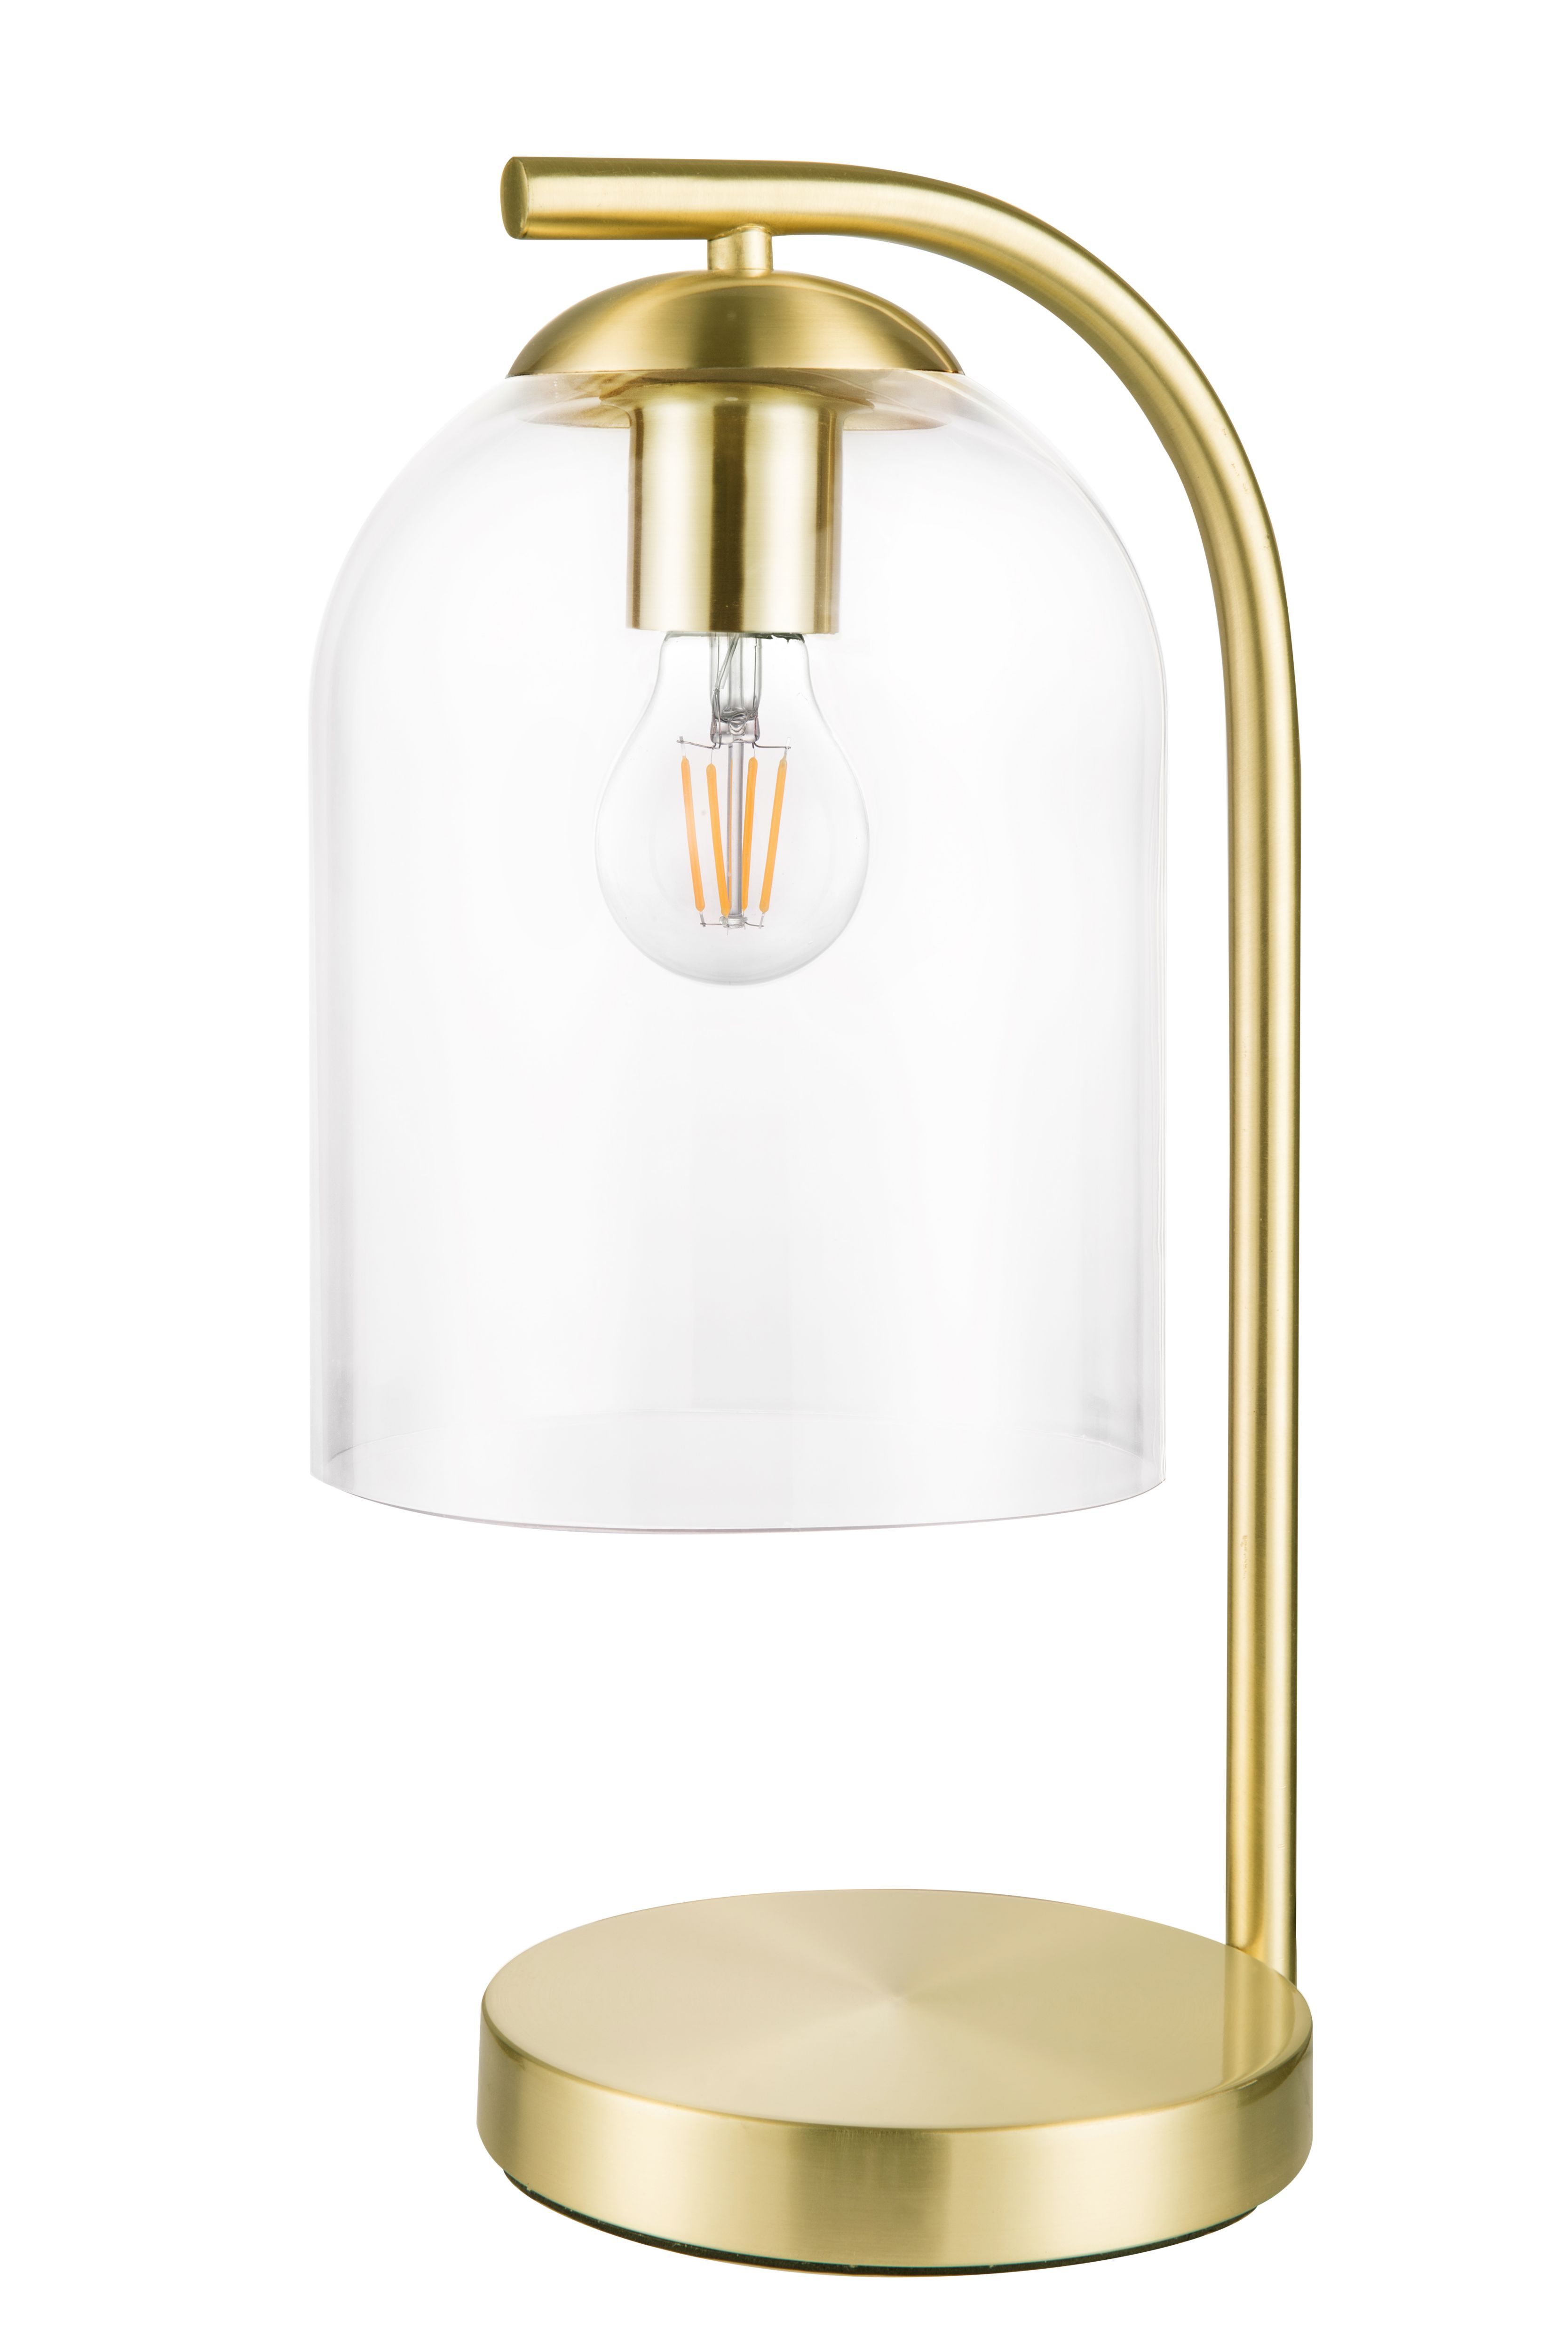 GoodHome Thestias Brushed Brass effect Table light